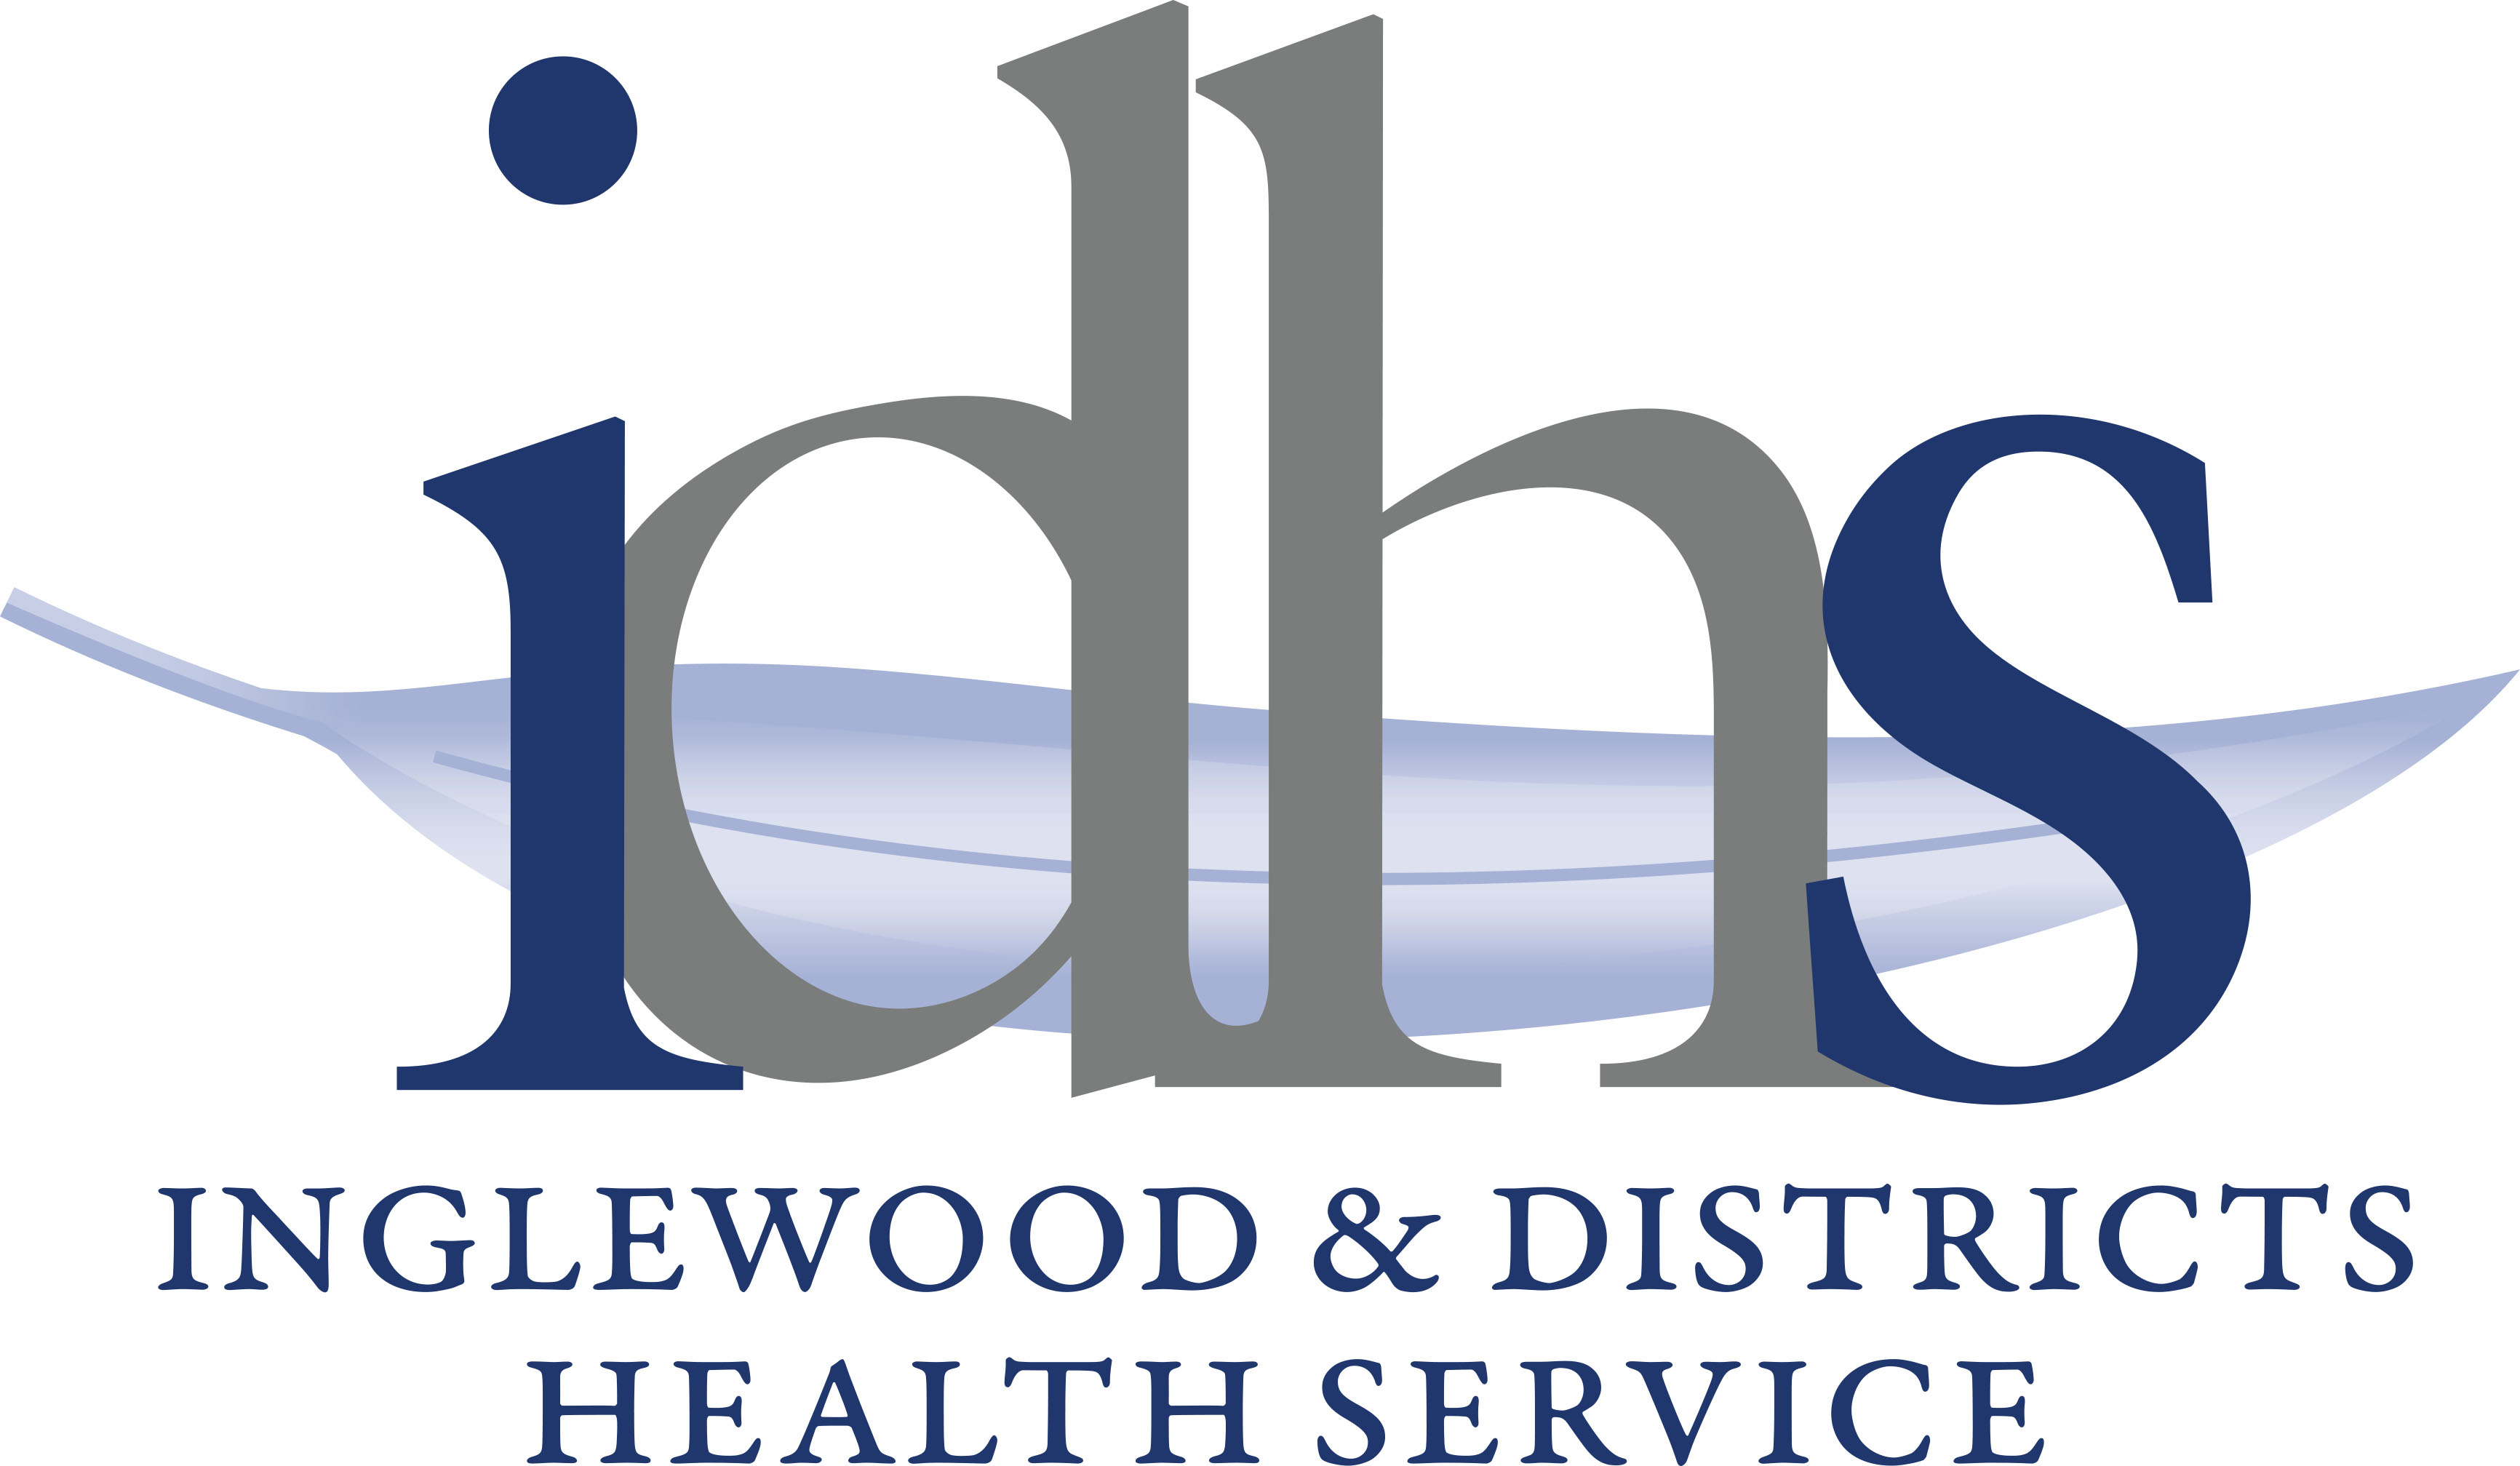 Inglewood Districts Health Service